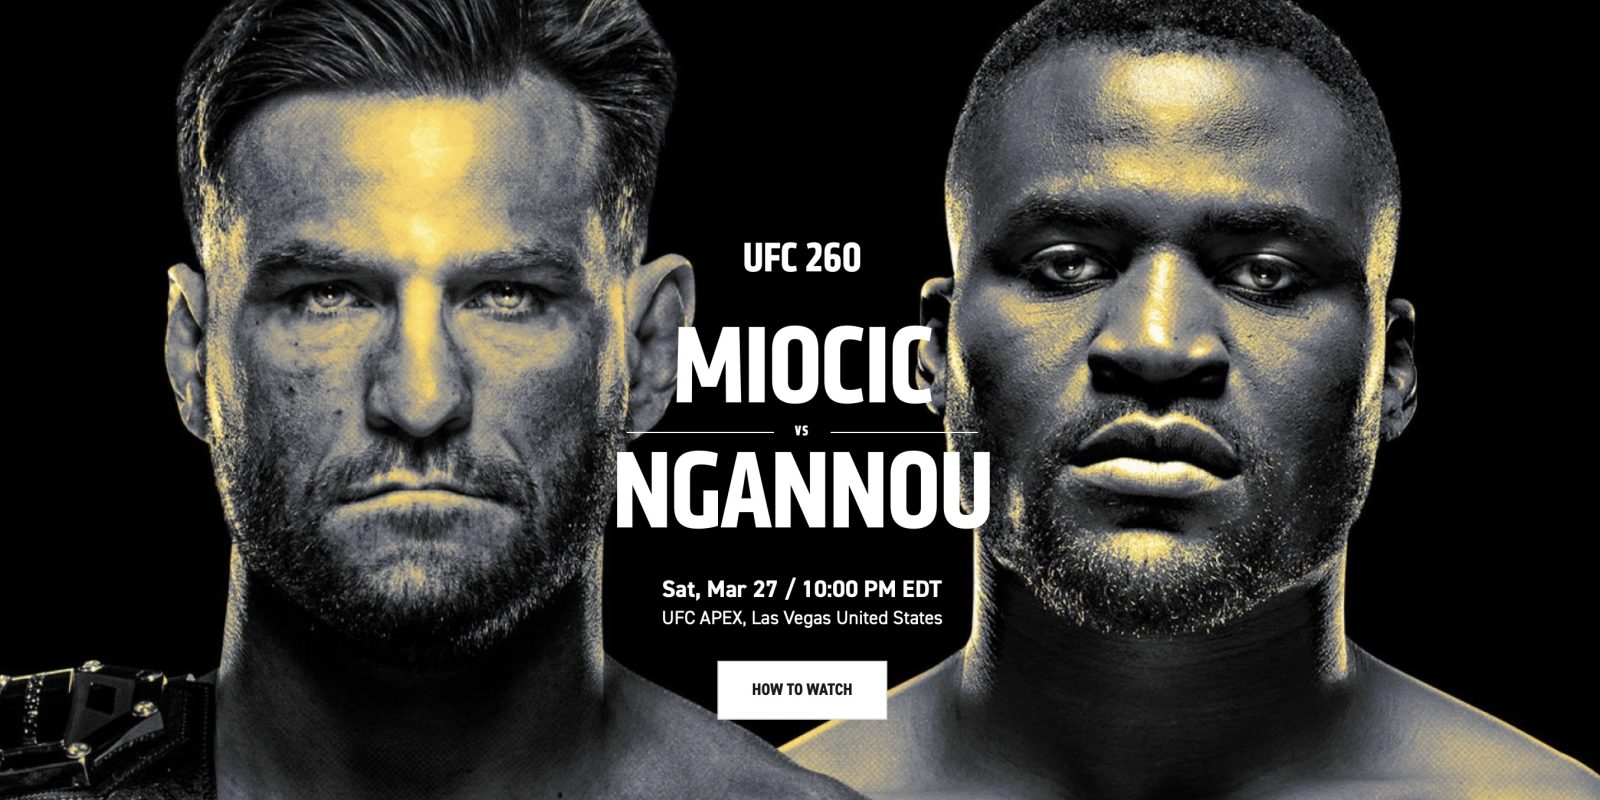 How to watch UFC 260 Miocic vs Ngannou on web, iPhone, Apple TV, more